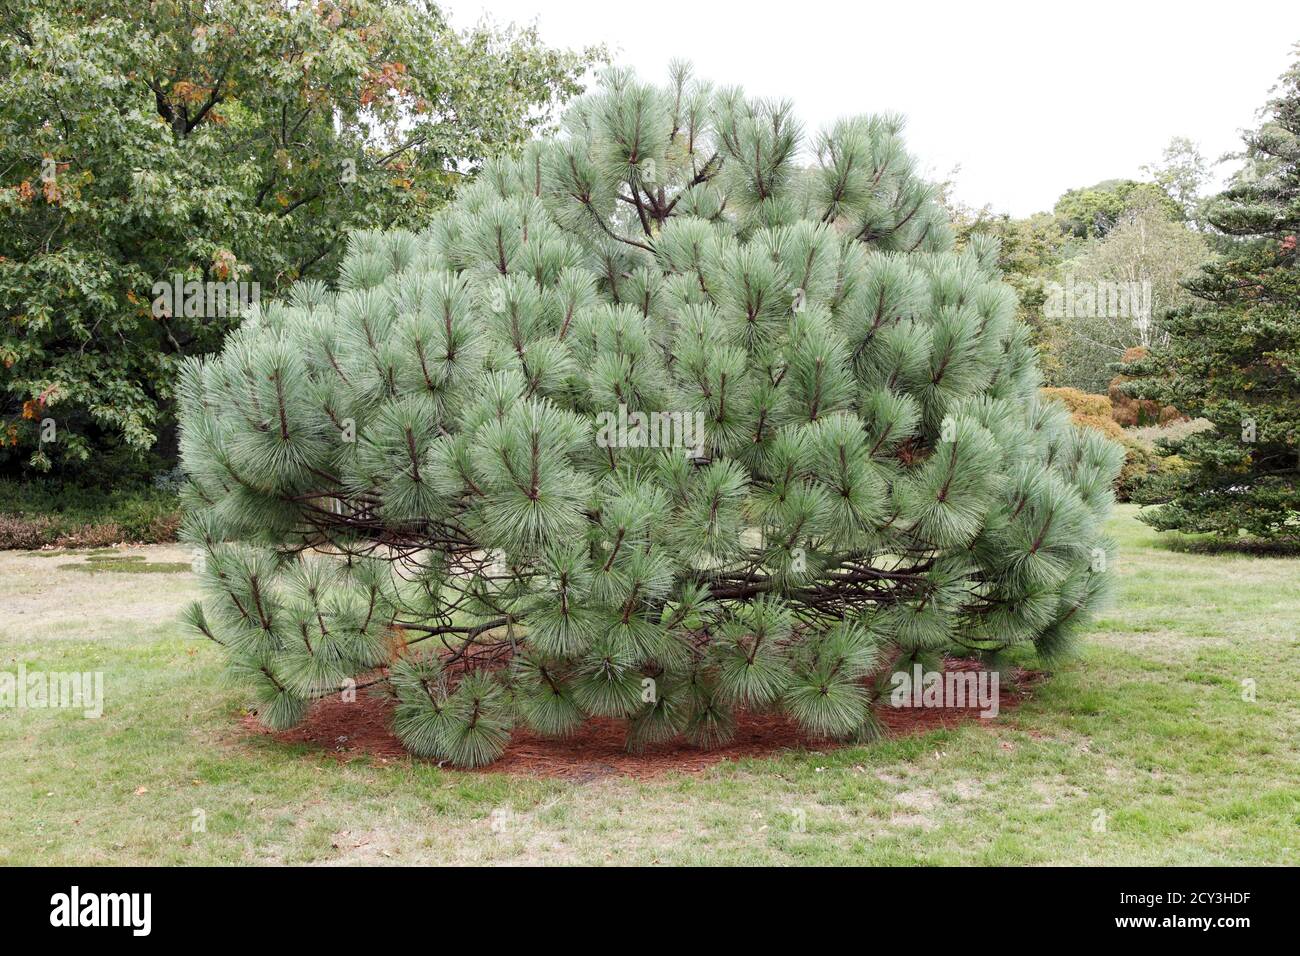 Pinus Montezumae or Montezuma Pine is a Mexican Blue Pine tree and type of conifer. Stock Photo